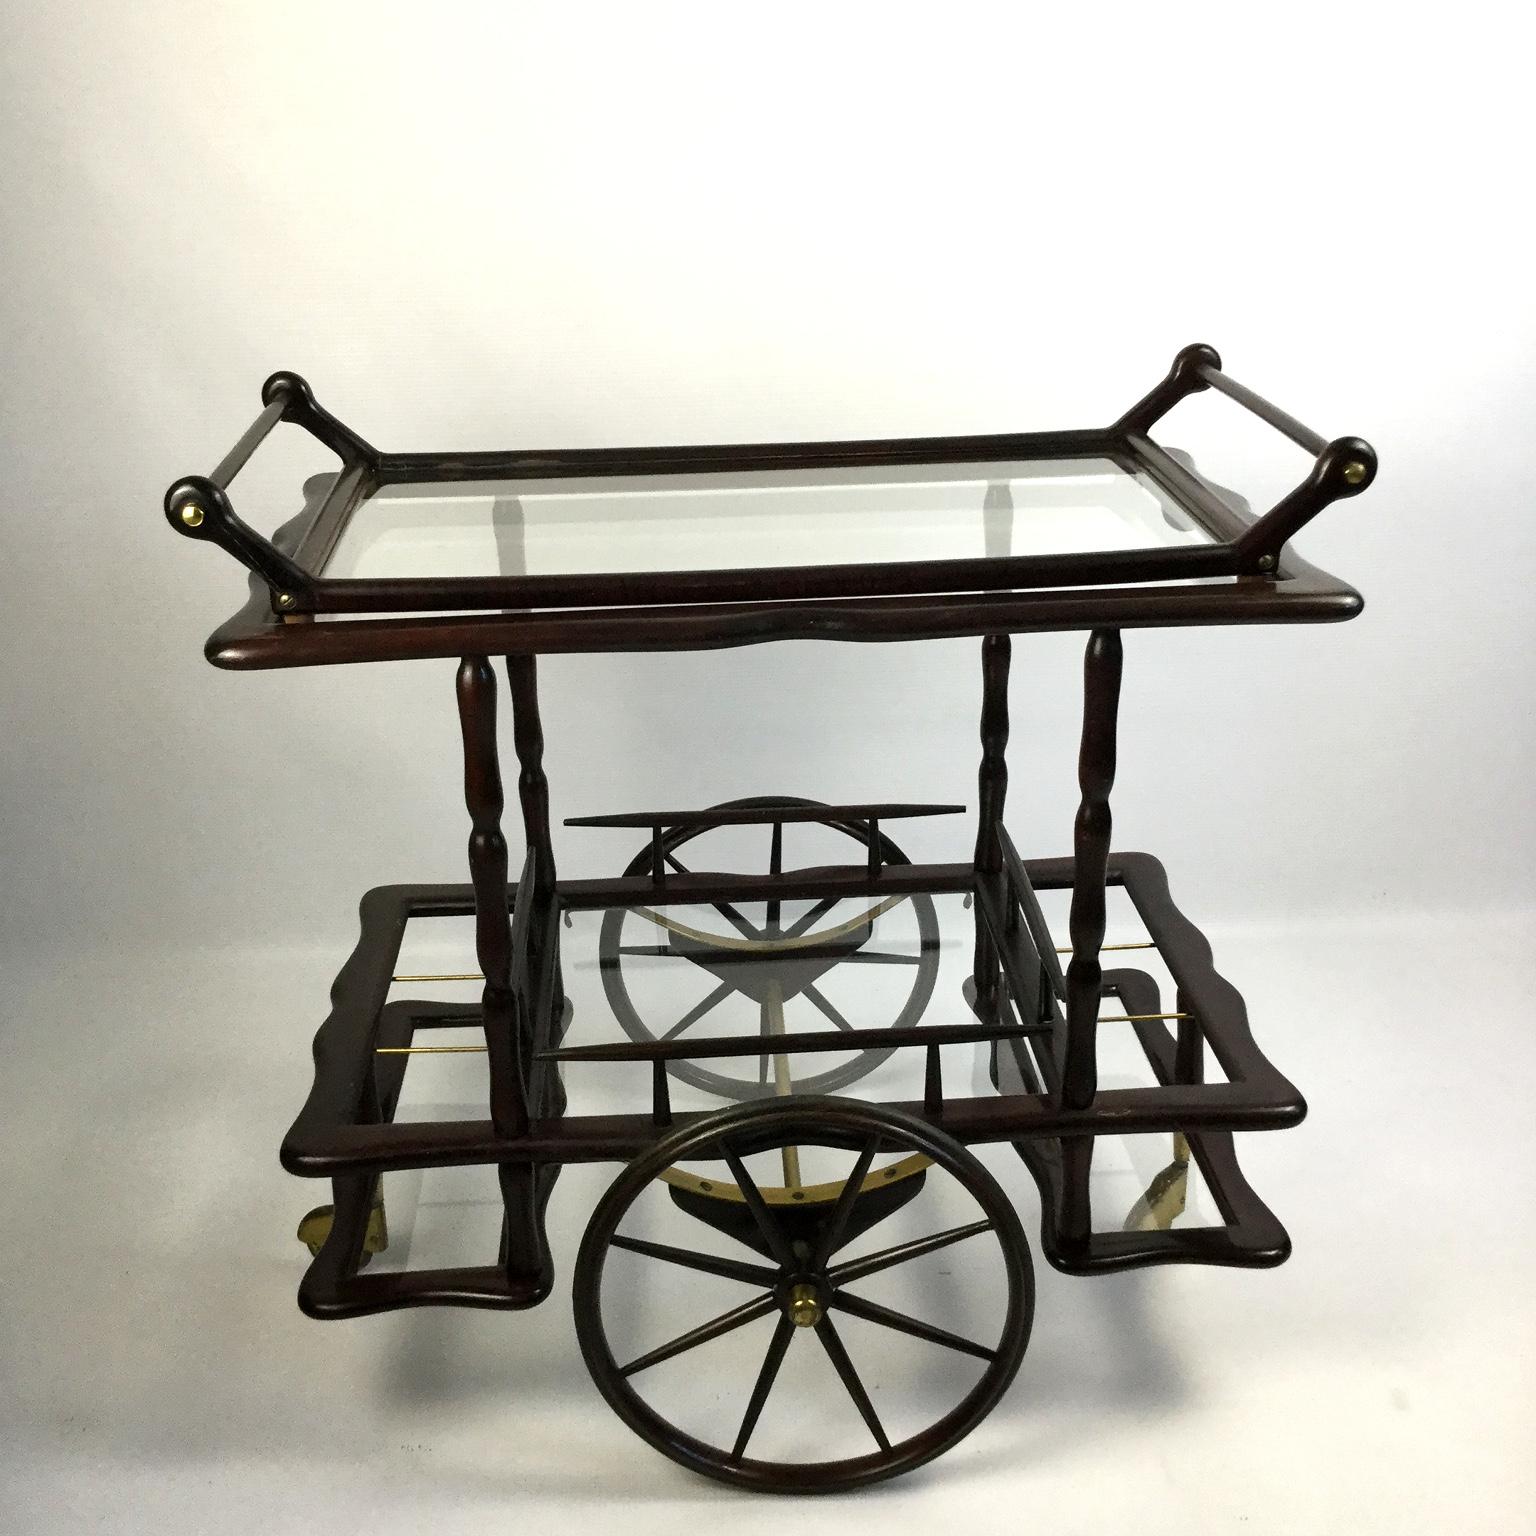 The 1950s Italian mahogany drinks trolley or bar carts, attributed to Cesare Lacca, with removable tray and two nicely brass wheels finish.